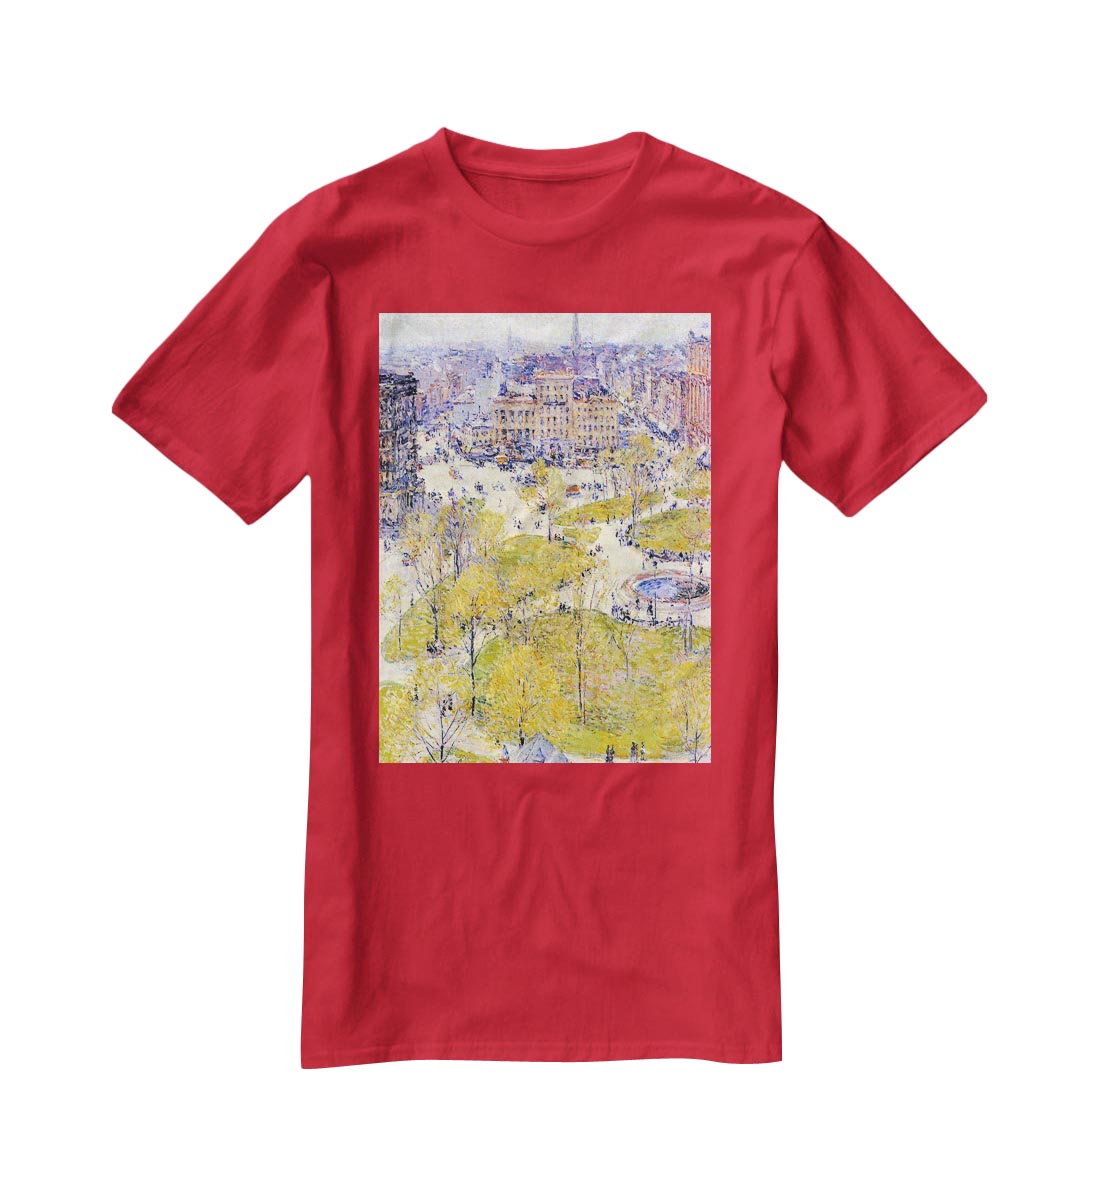 Union Square in Spring by Hassam T-Shirt - Canvas Art Rocks - 4